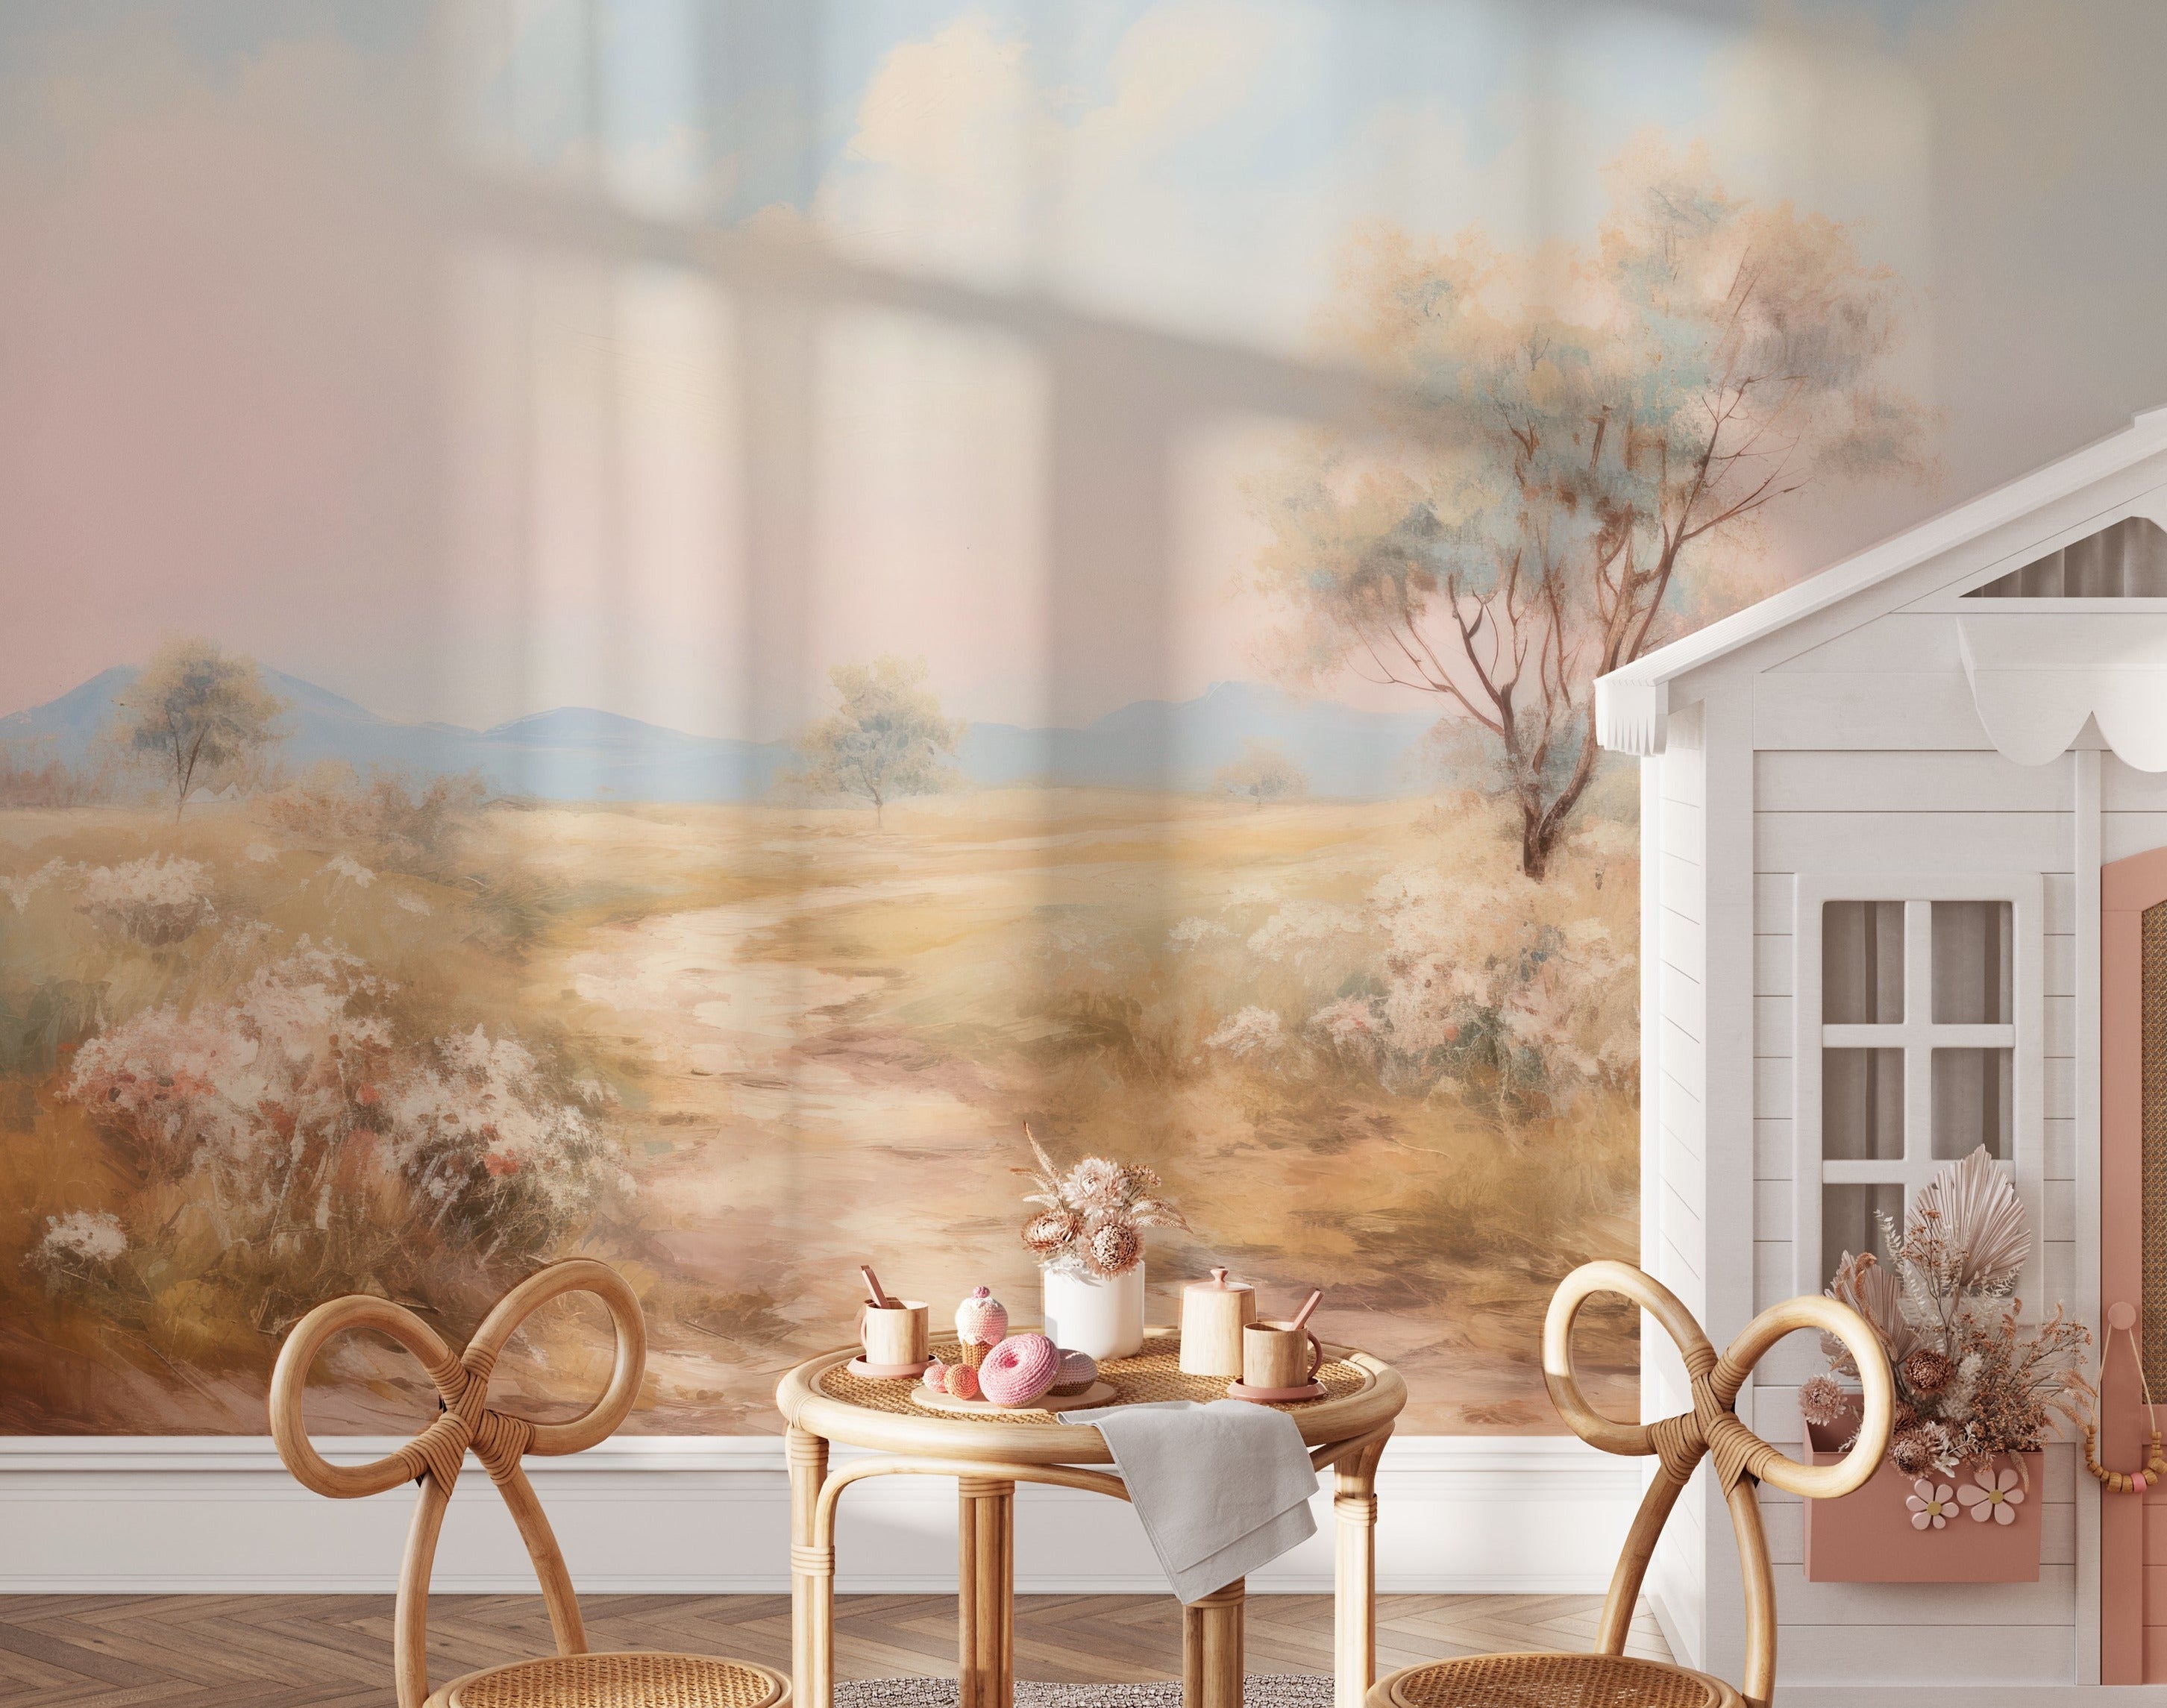 "Tranquil prairie scene mural with pastel skies and a tree in the foreground"